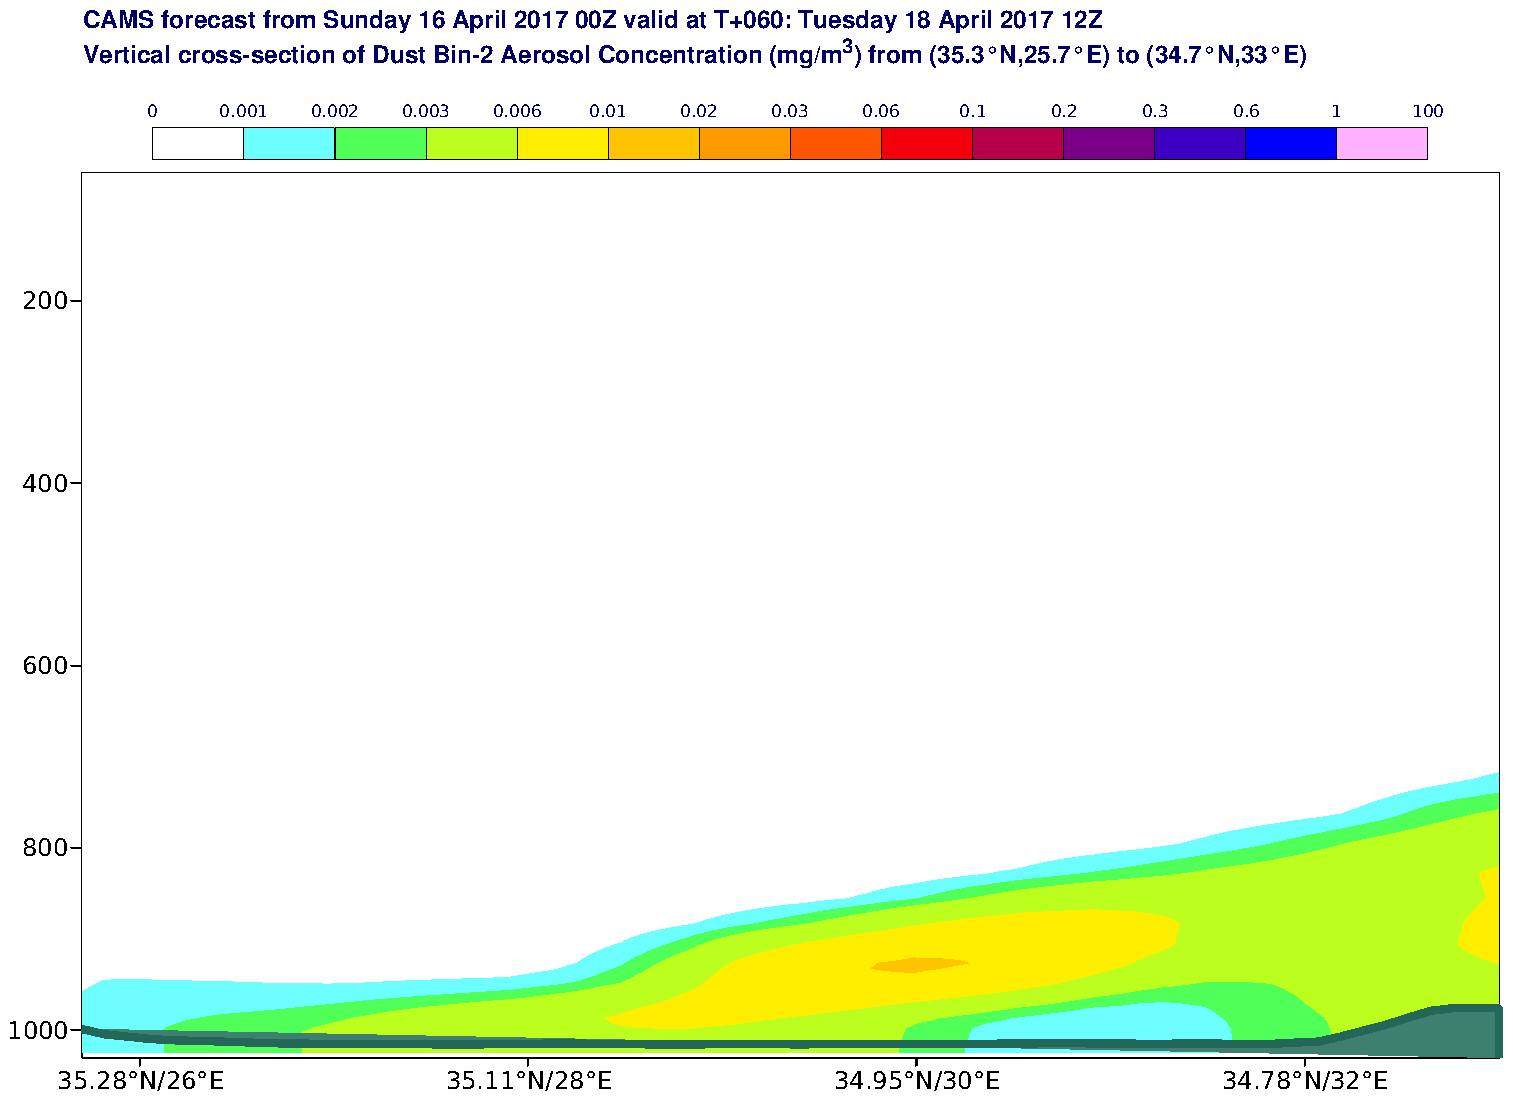 Vertical cross-section of Dust Bin-2 Aerosol Concentration (mg/m3) valid at T60 - 2017-04-18 12:00